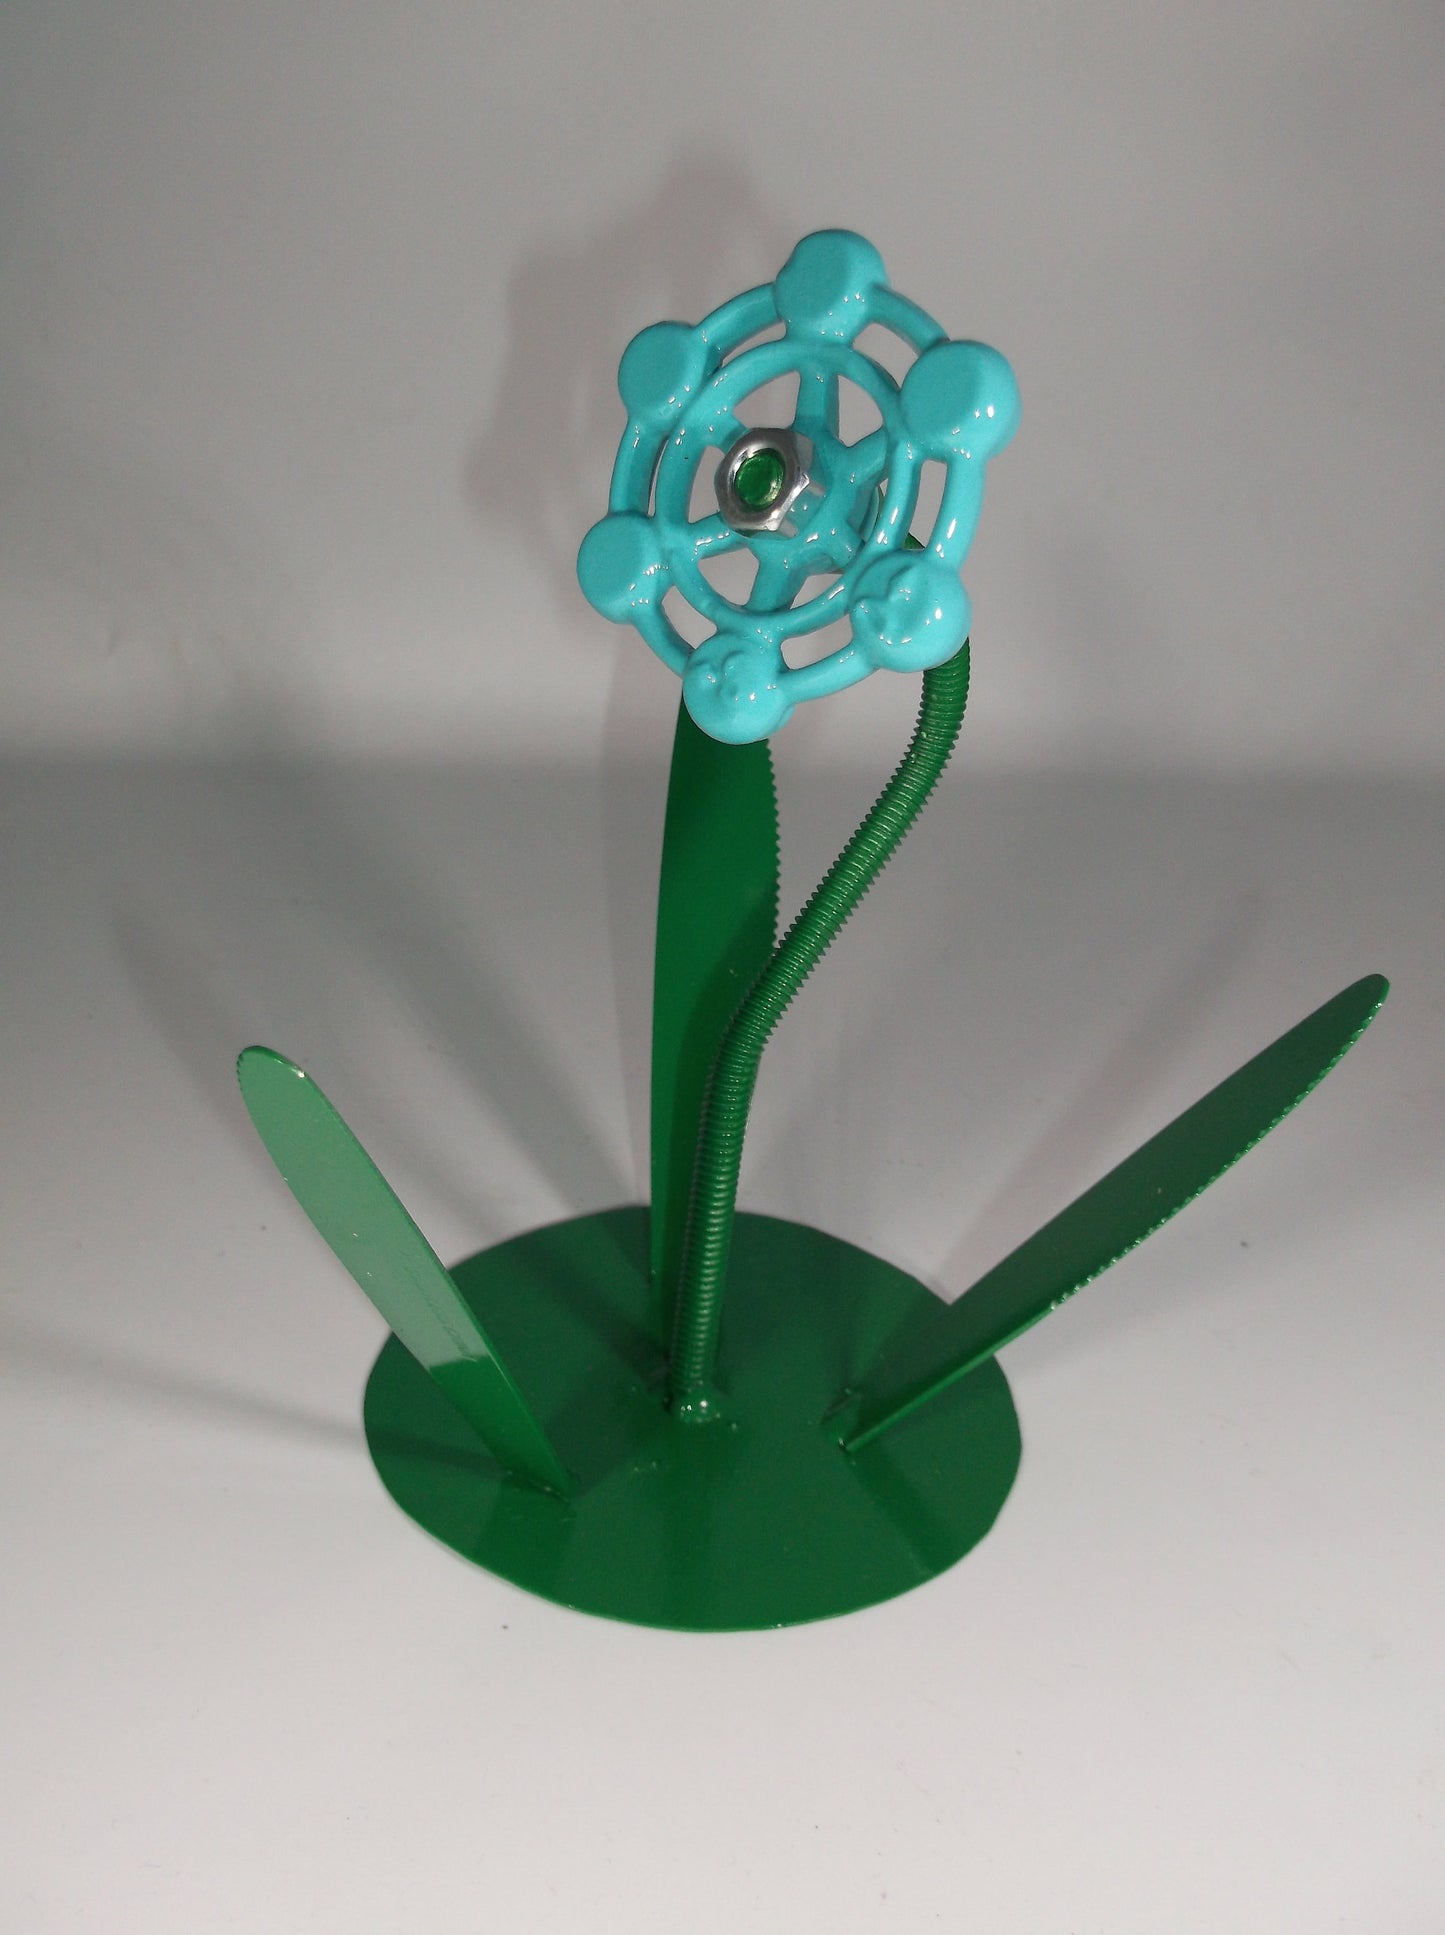 Teal Blue Metal Flower, Floral Decor, Faucet Flower up cycled Art